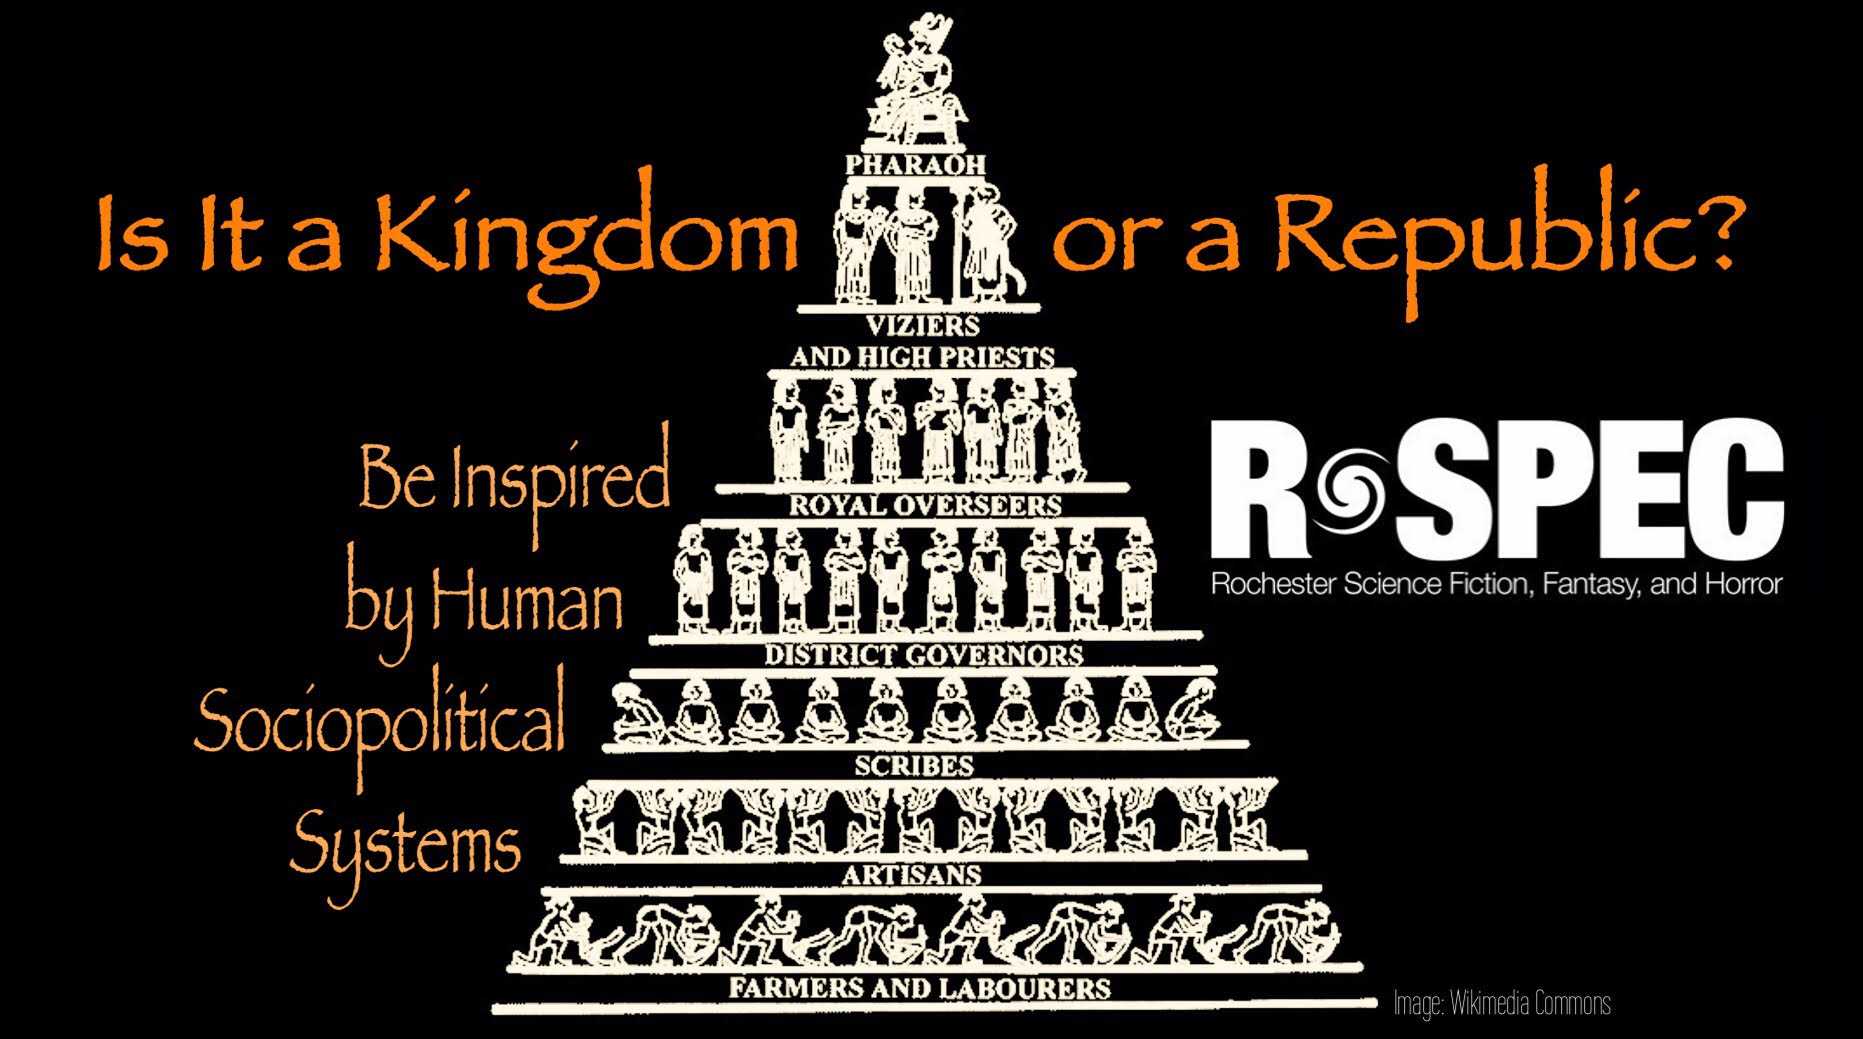 October 2021: Is It a Kingdom or a Republic? Be Inspired by Human Sociopolitical Systems